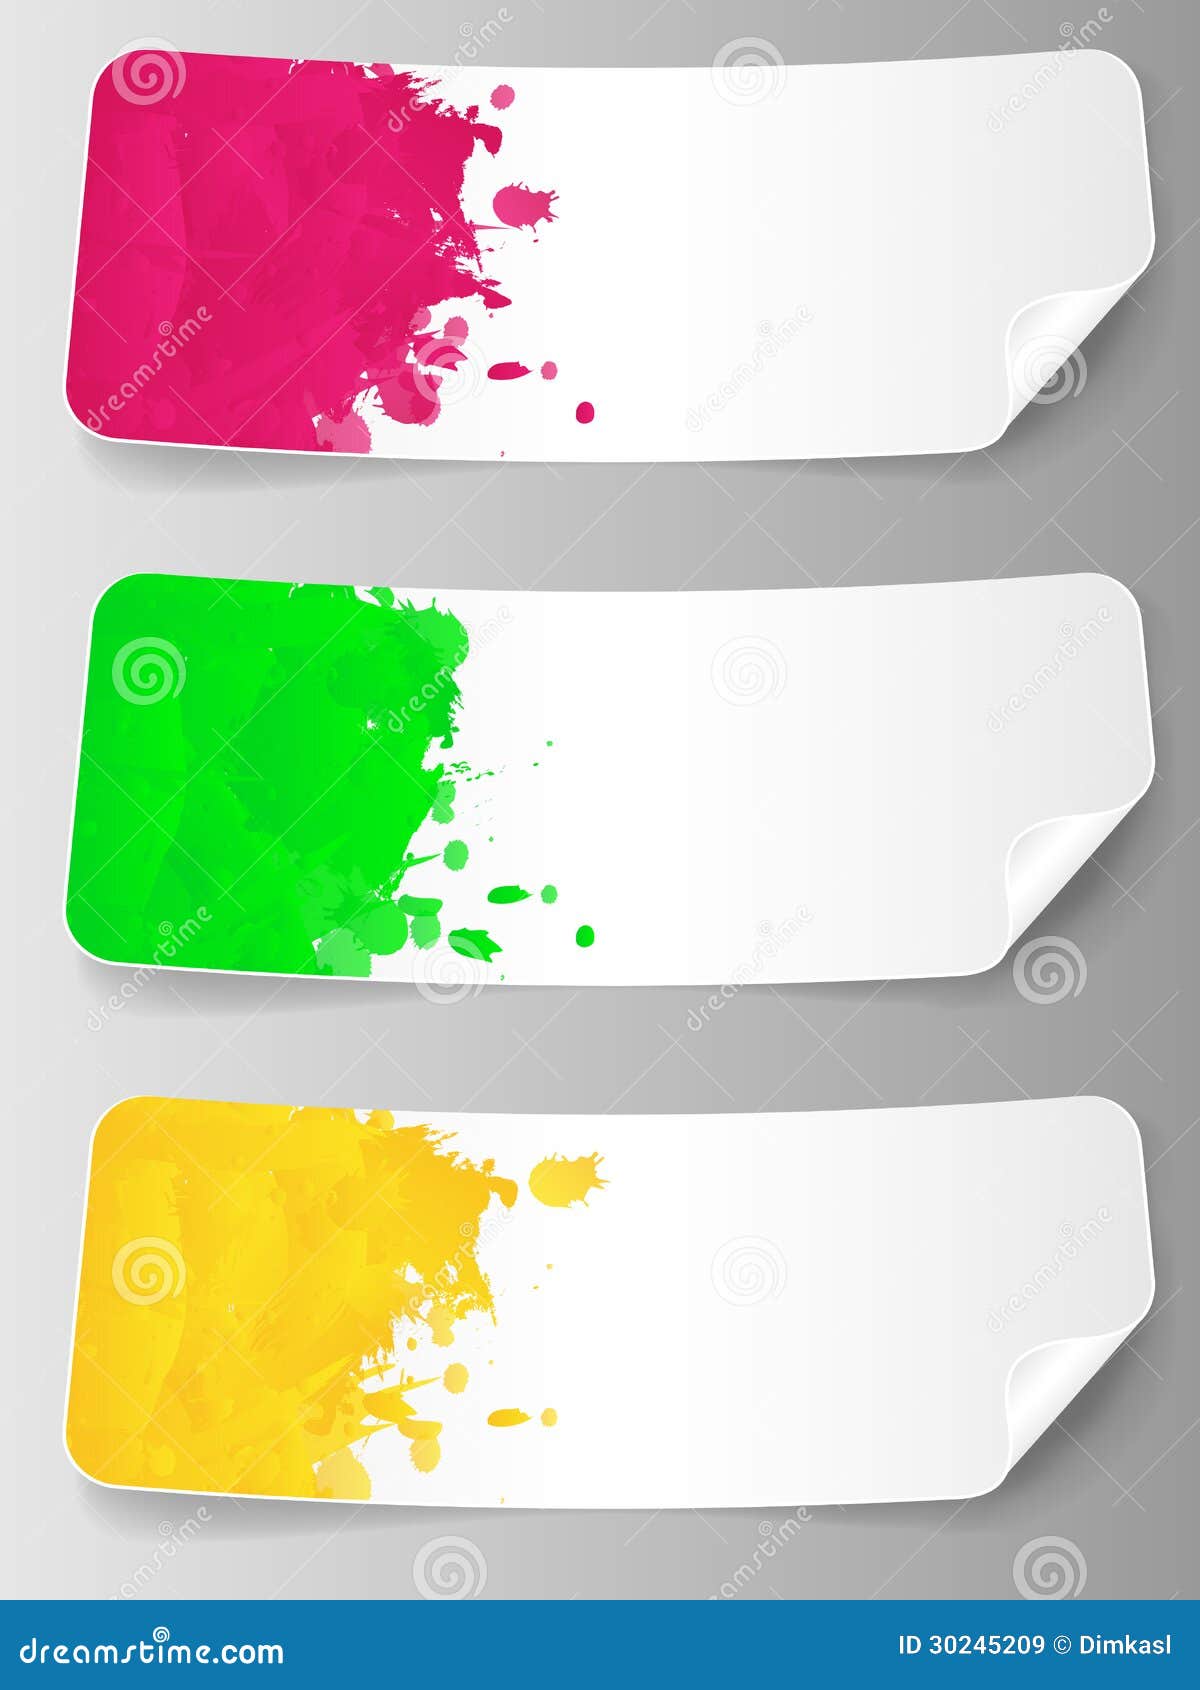 Abstract Background with Paint Splashes. Stock Vector - Illustration of ...